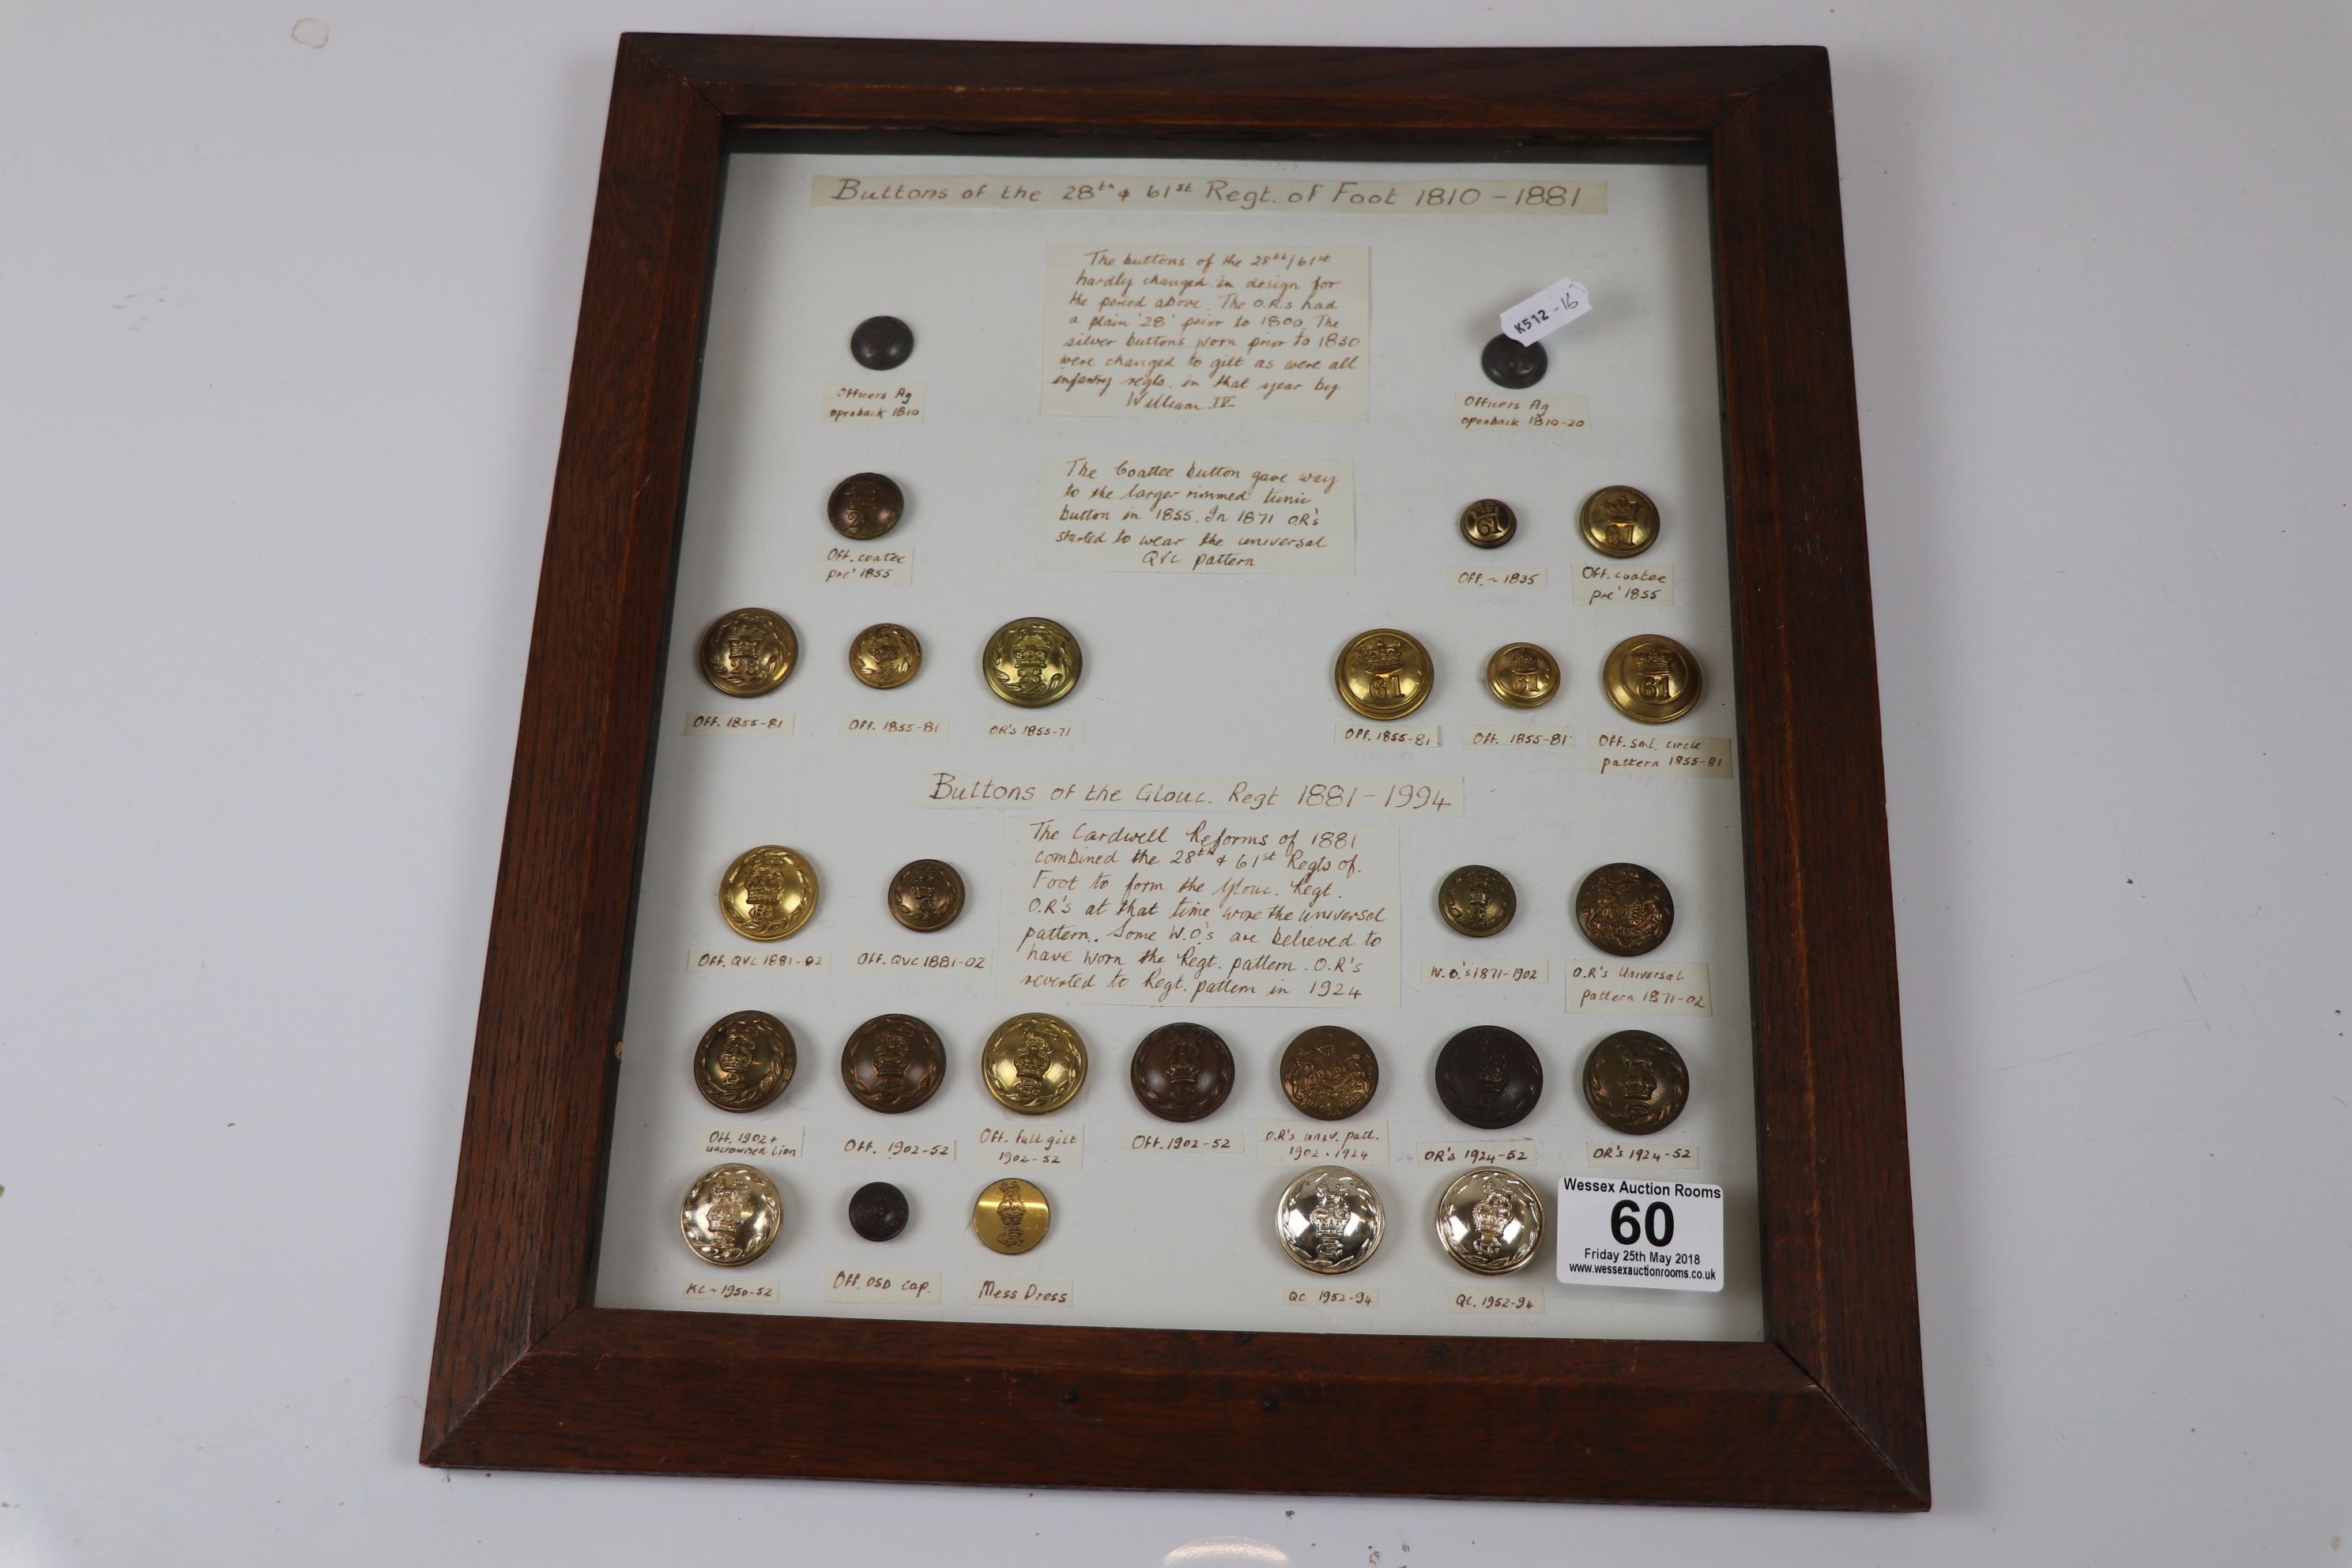 A Framed Collection of Military buttons of the 28th & 61st Regiment of Foot 1810 - 1881 and The